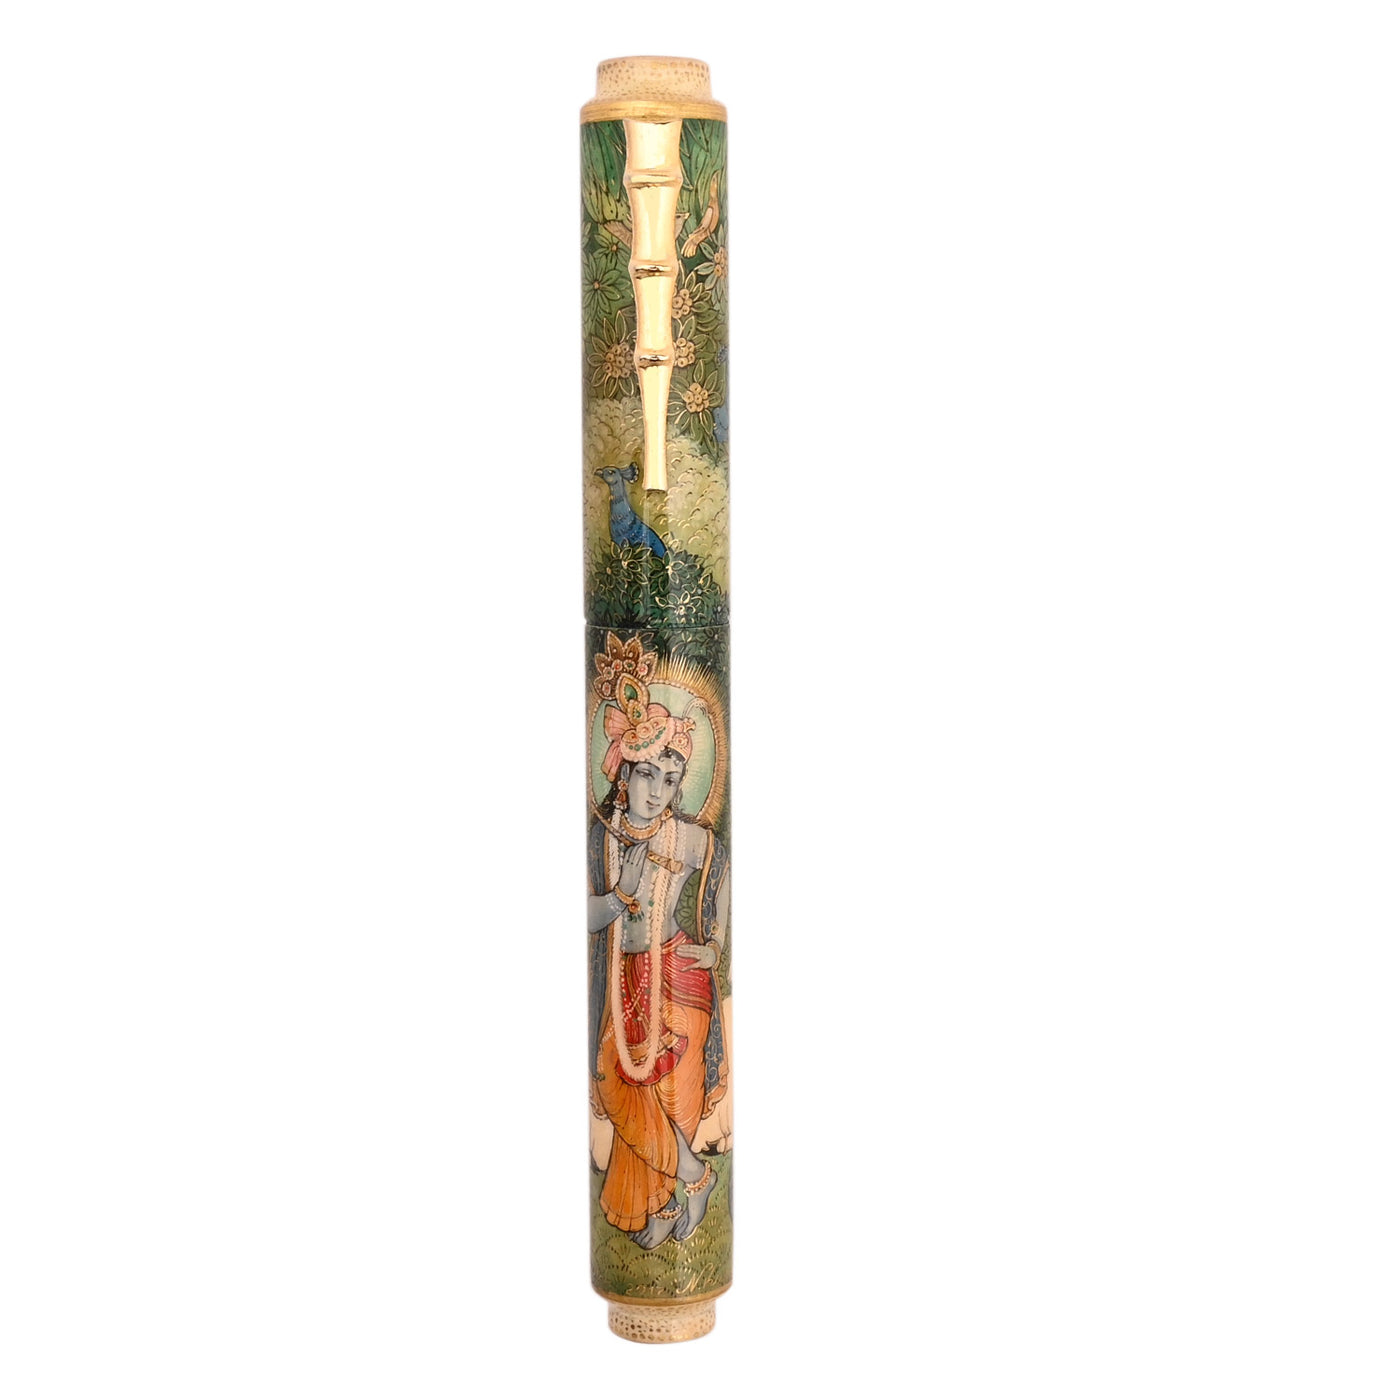 AP Limited Editions - The Writer Russian Lacquer Art Fountain Pen - The Young Krishna 4